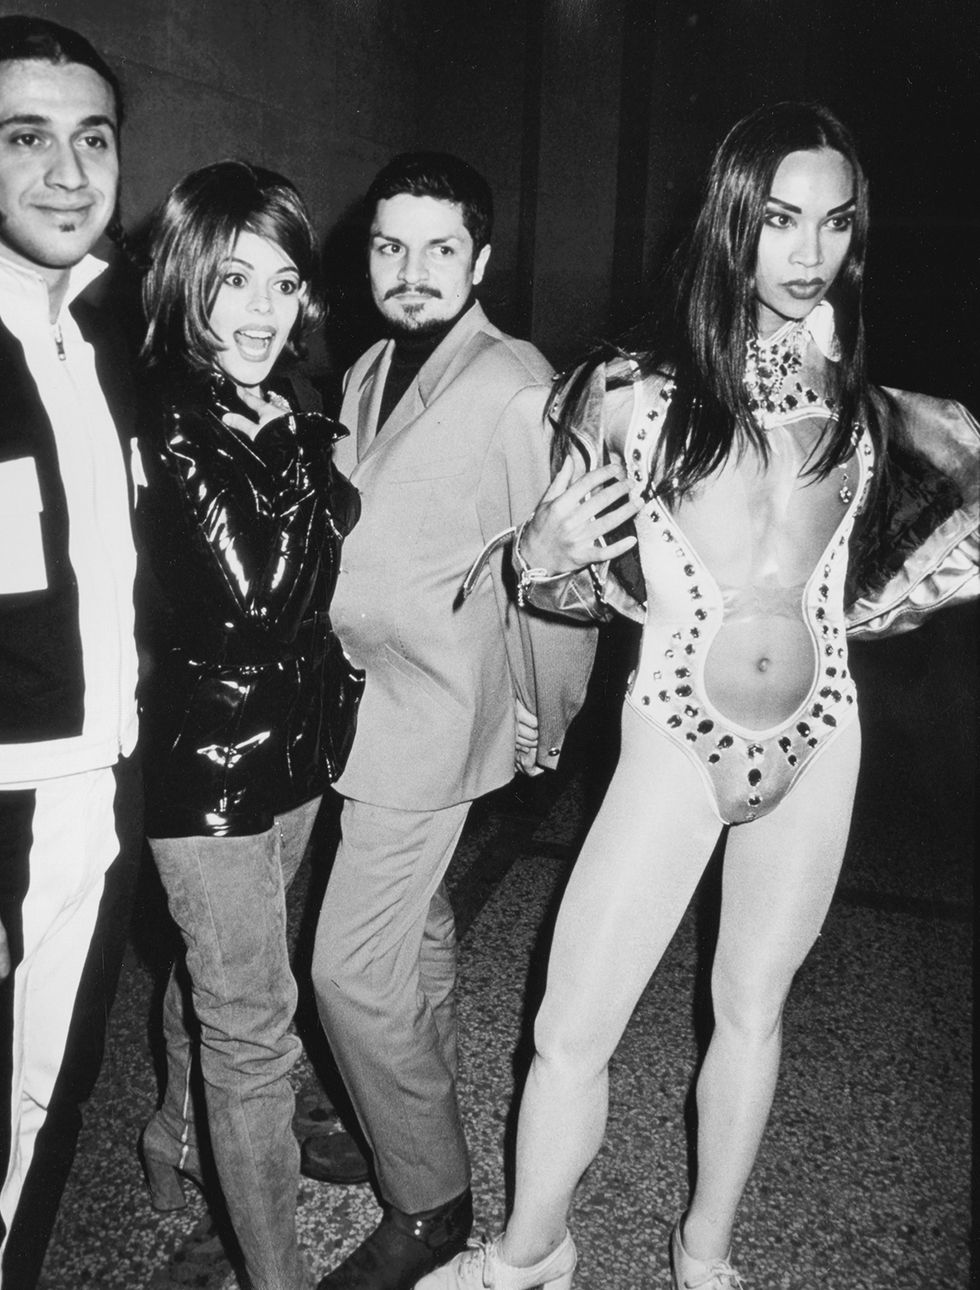 musicians super dj dmitri, lady miss kier and towa tei of deee lite and desiger zaldy attend 10th annual council of fashion designers of america awards on february 25, 1991 at the metropolitan museum of art in new york city photo by ron galellaron galella collection via getty images